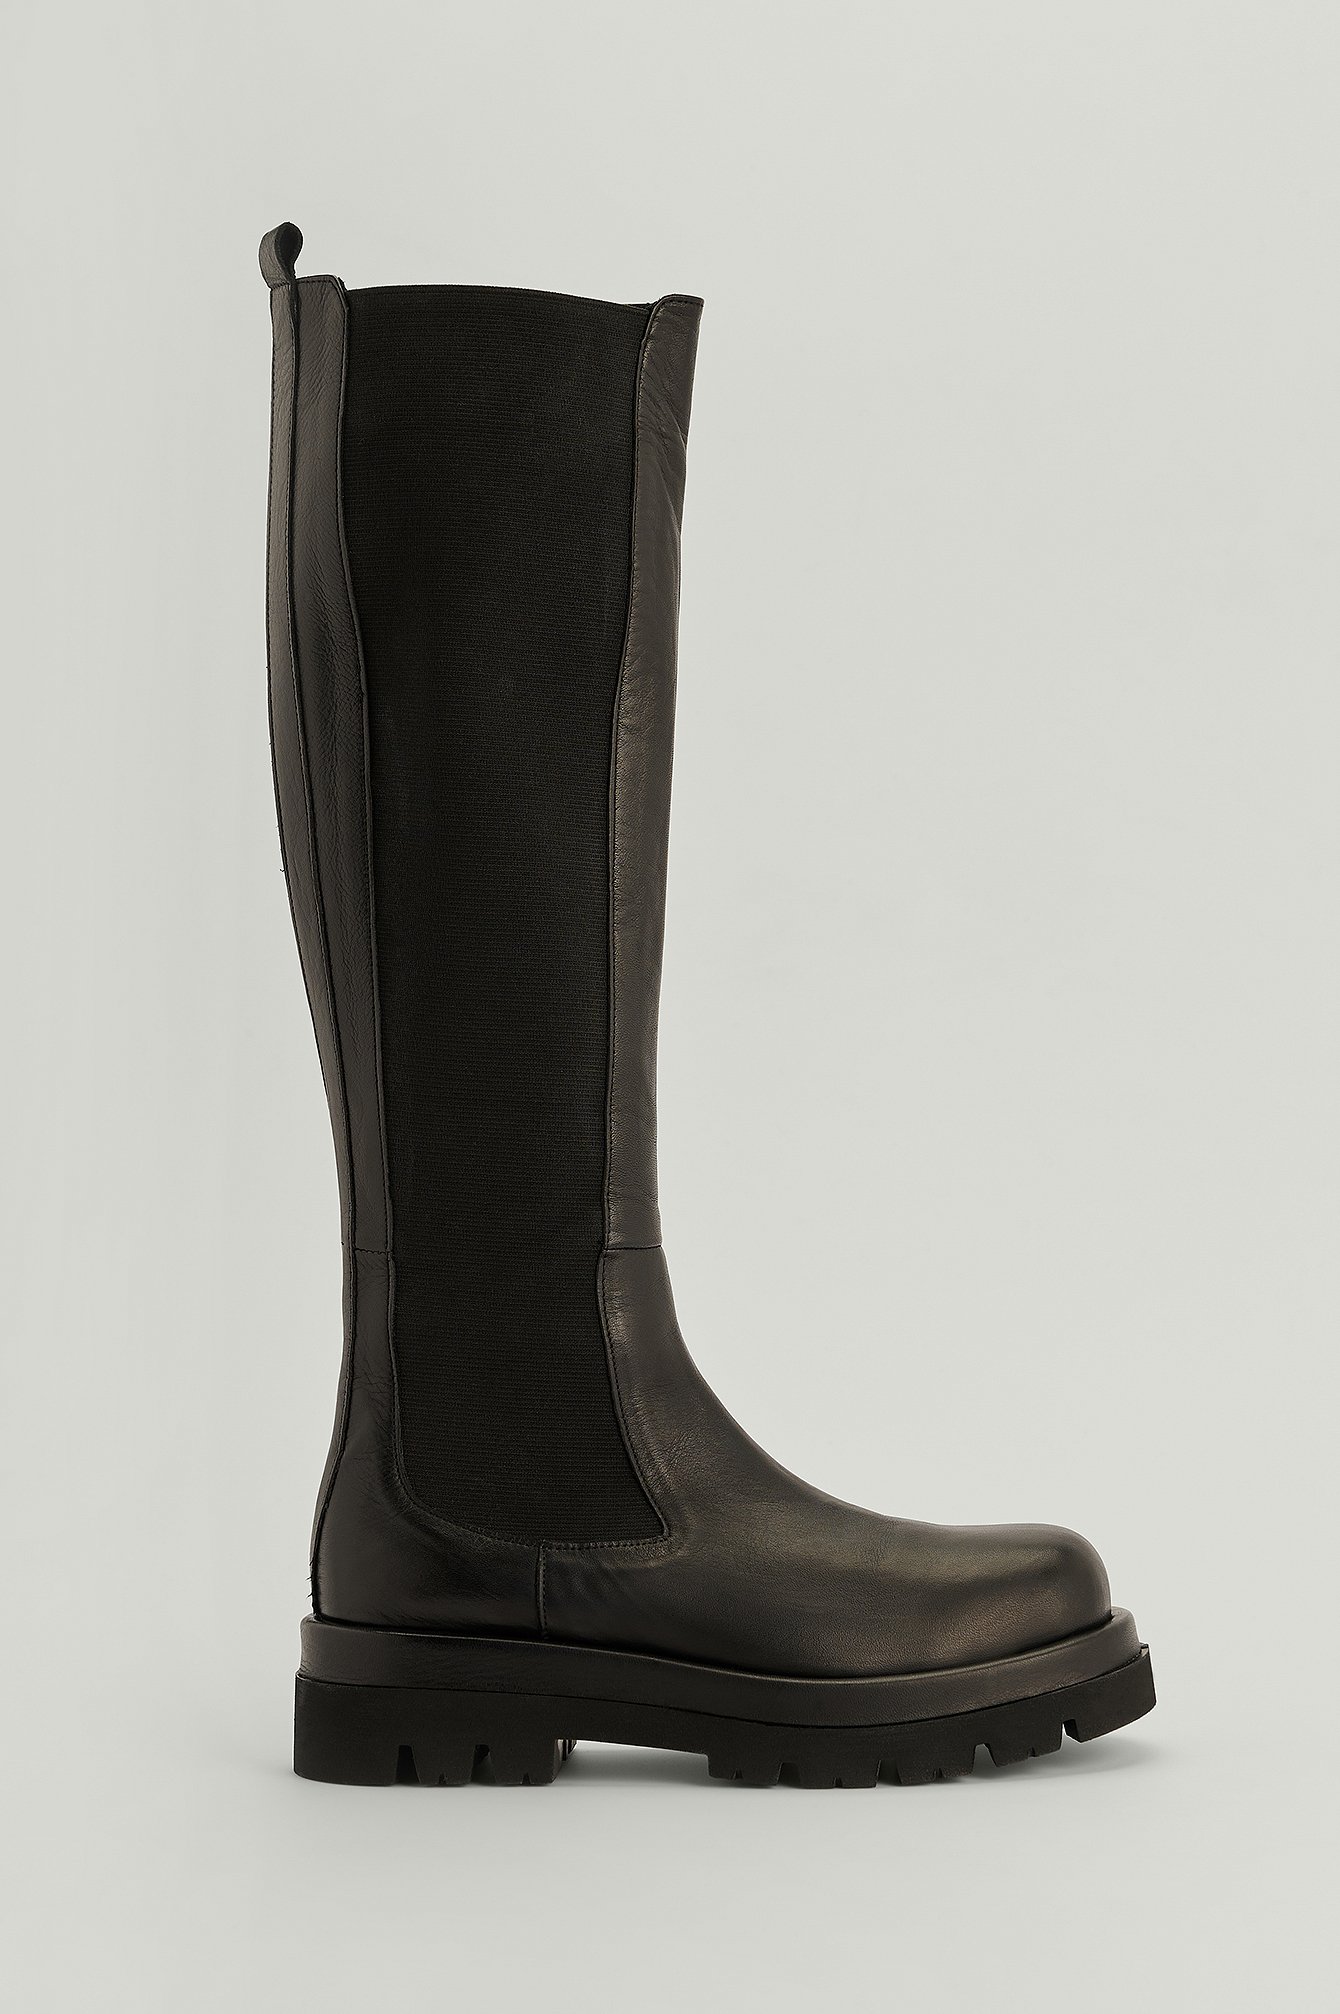 Black Chunky Leather Profile Shaft Boots